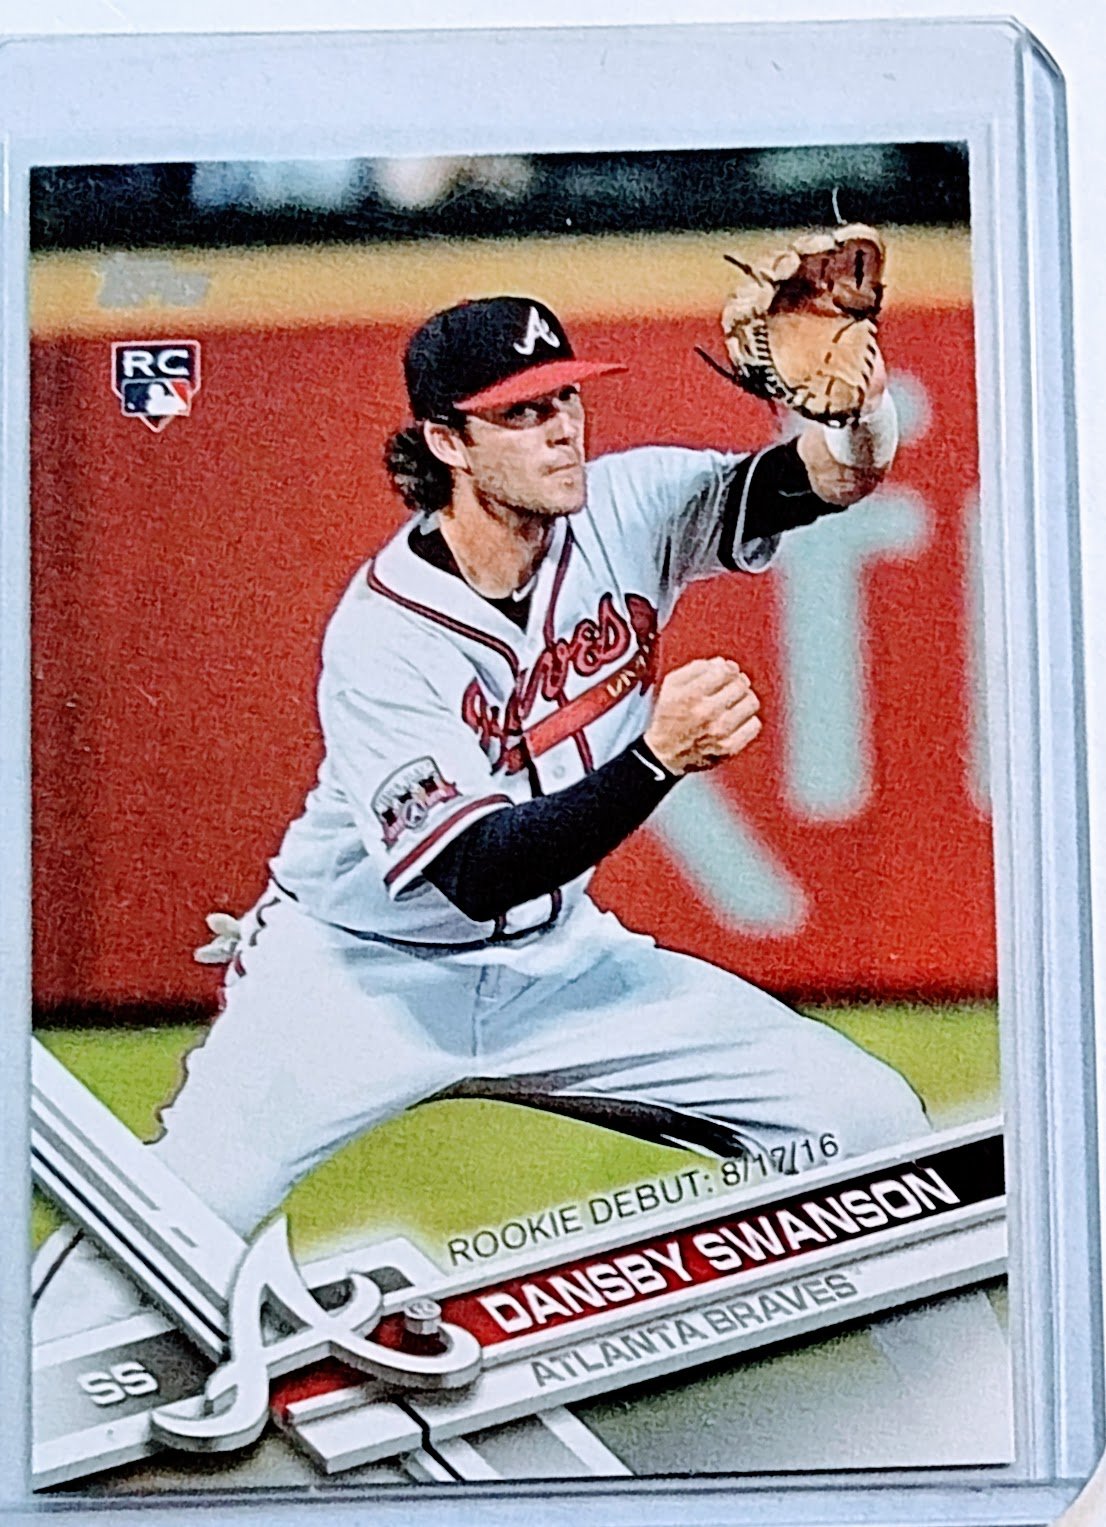 2017 Topps Update Dansby Swanson Rookie Debut Baseball Card TPTV simple Xclusive Collectibles   